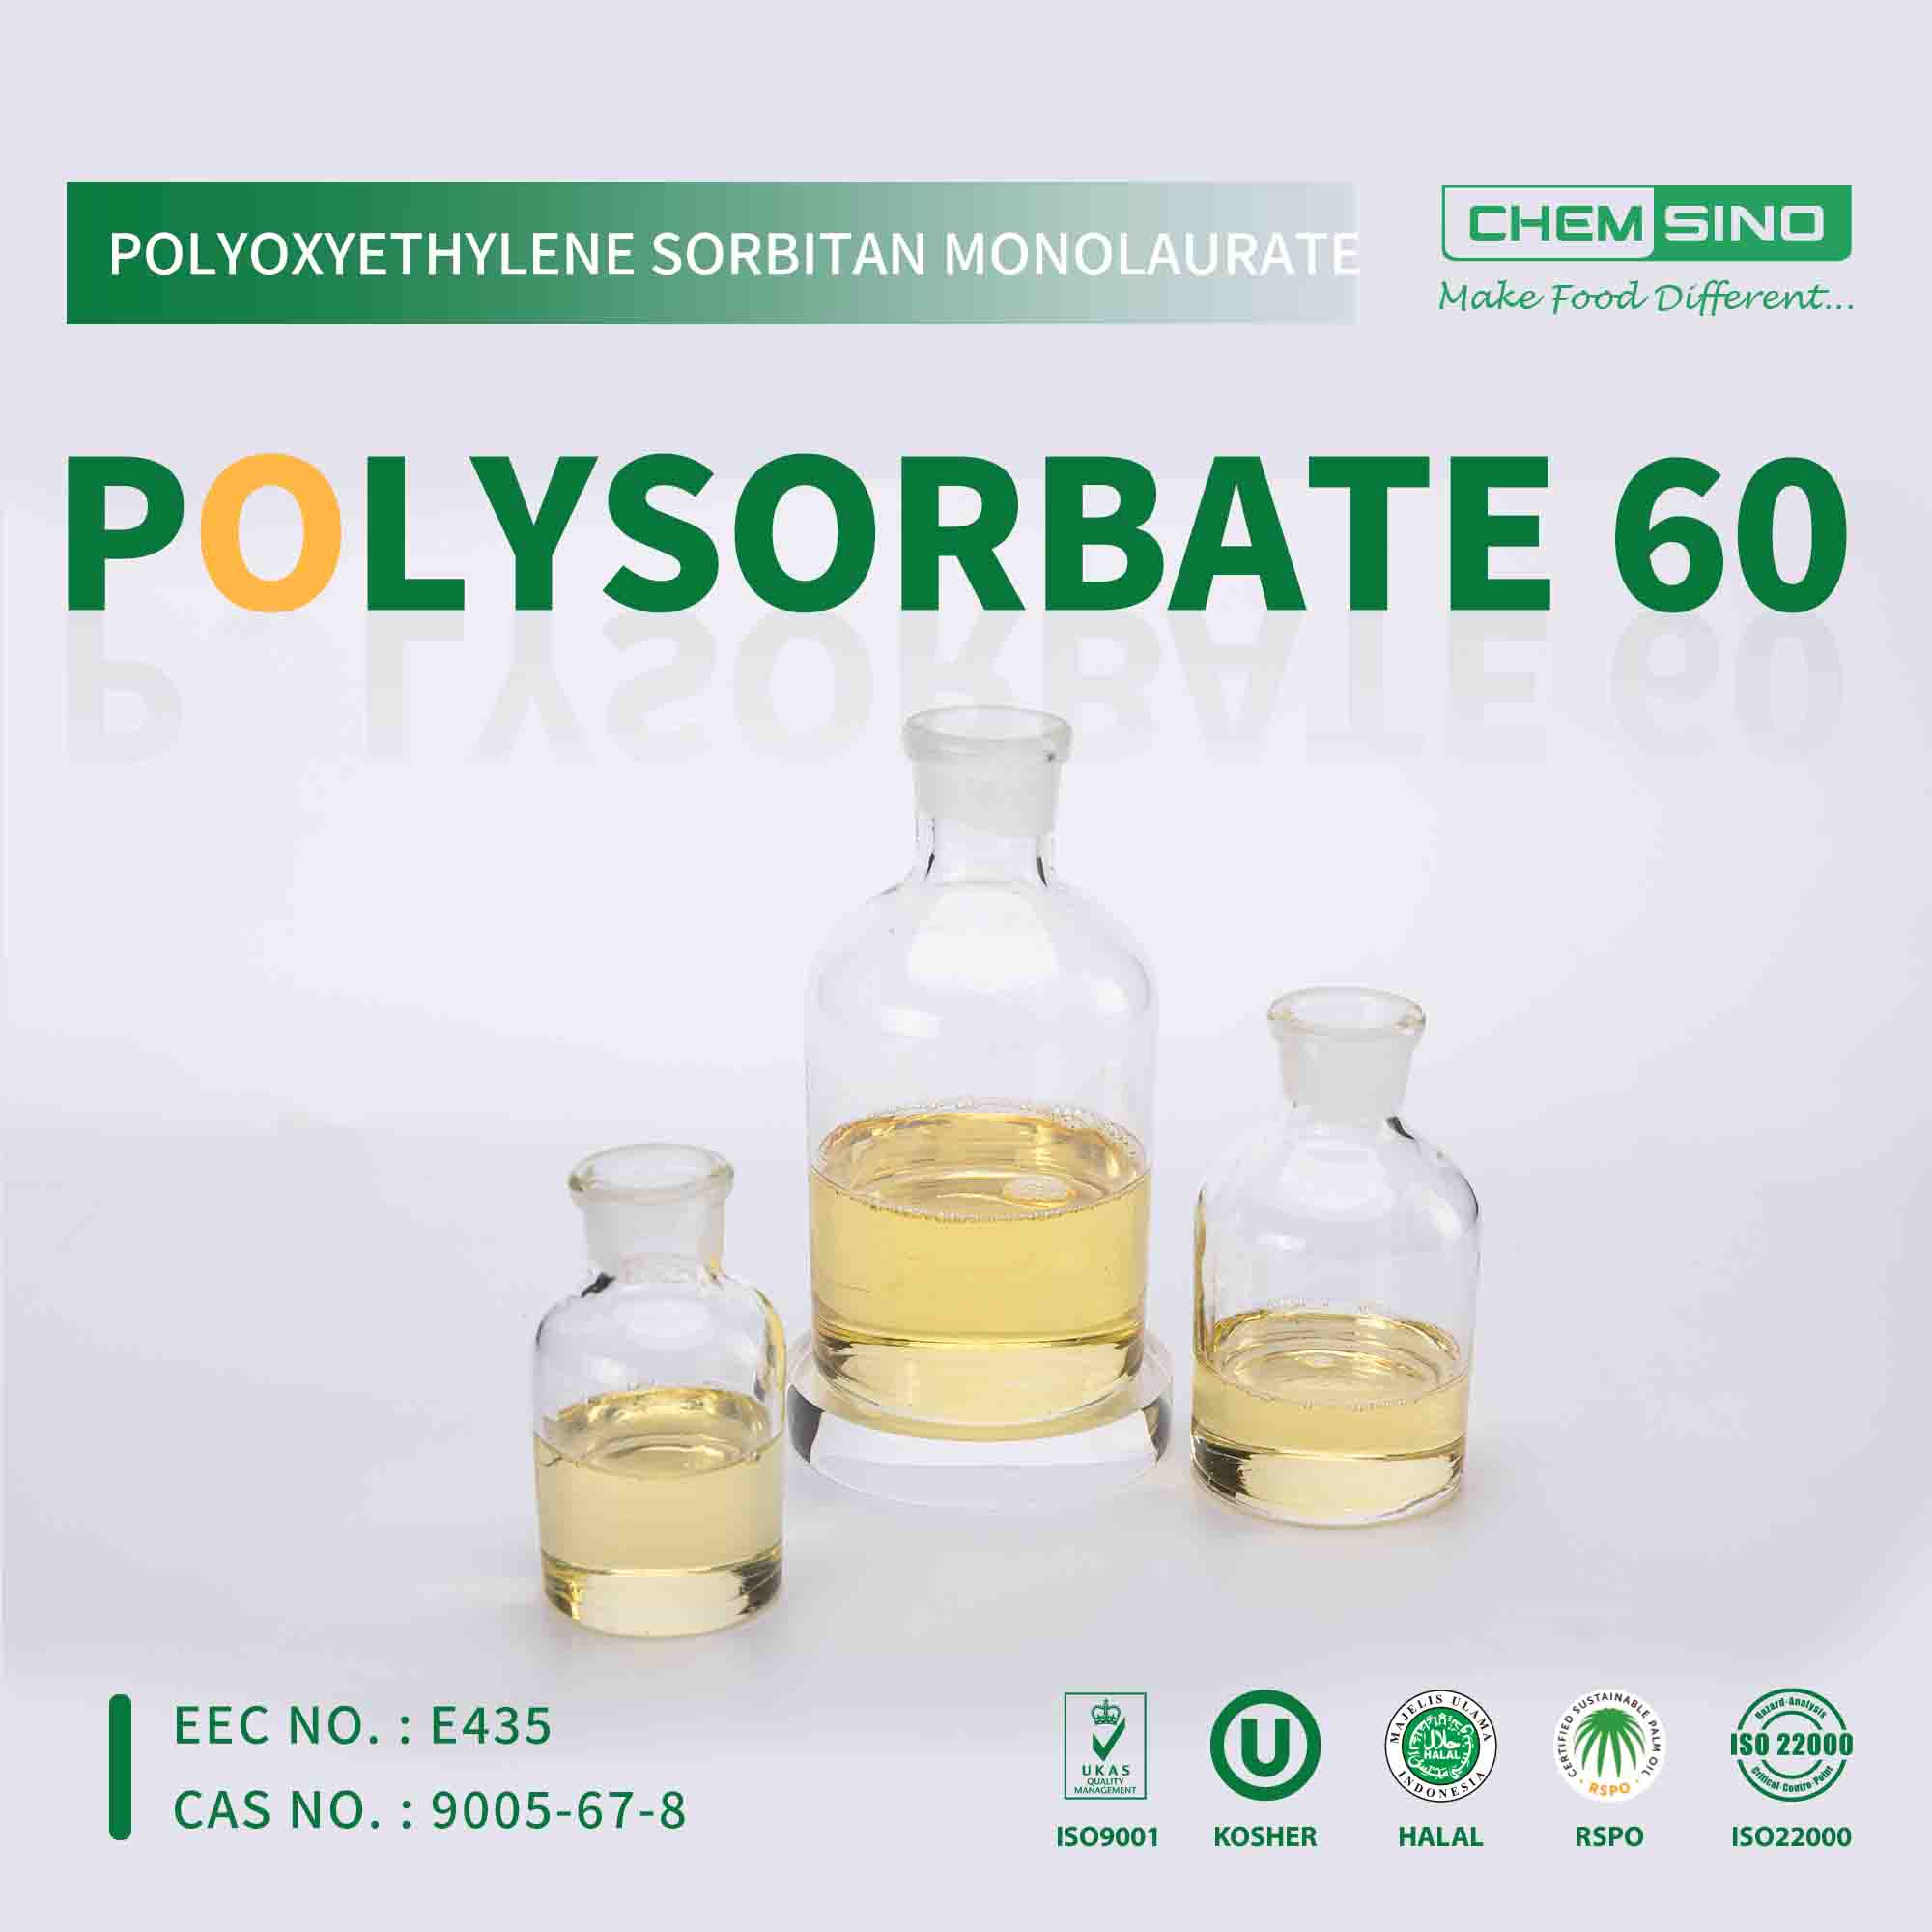 Polysorbate 60 Emulsifier Uses in Food and Skin Care